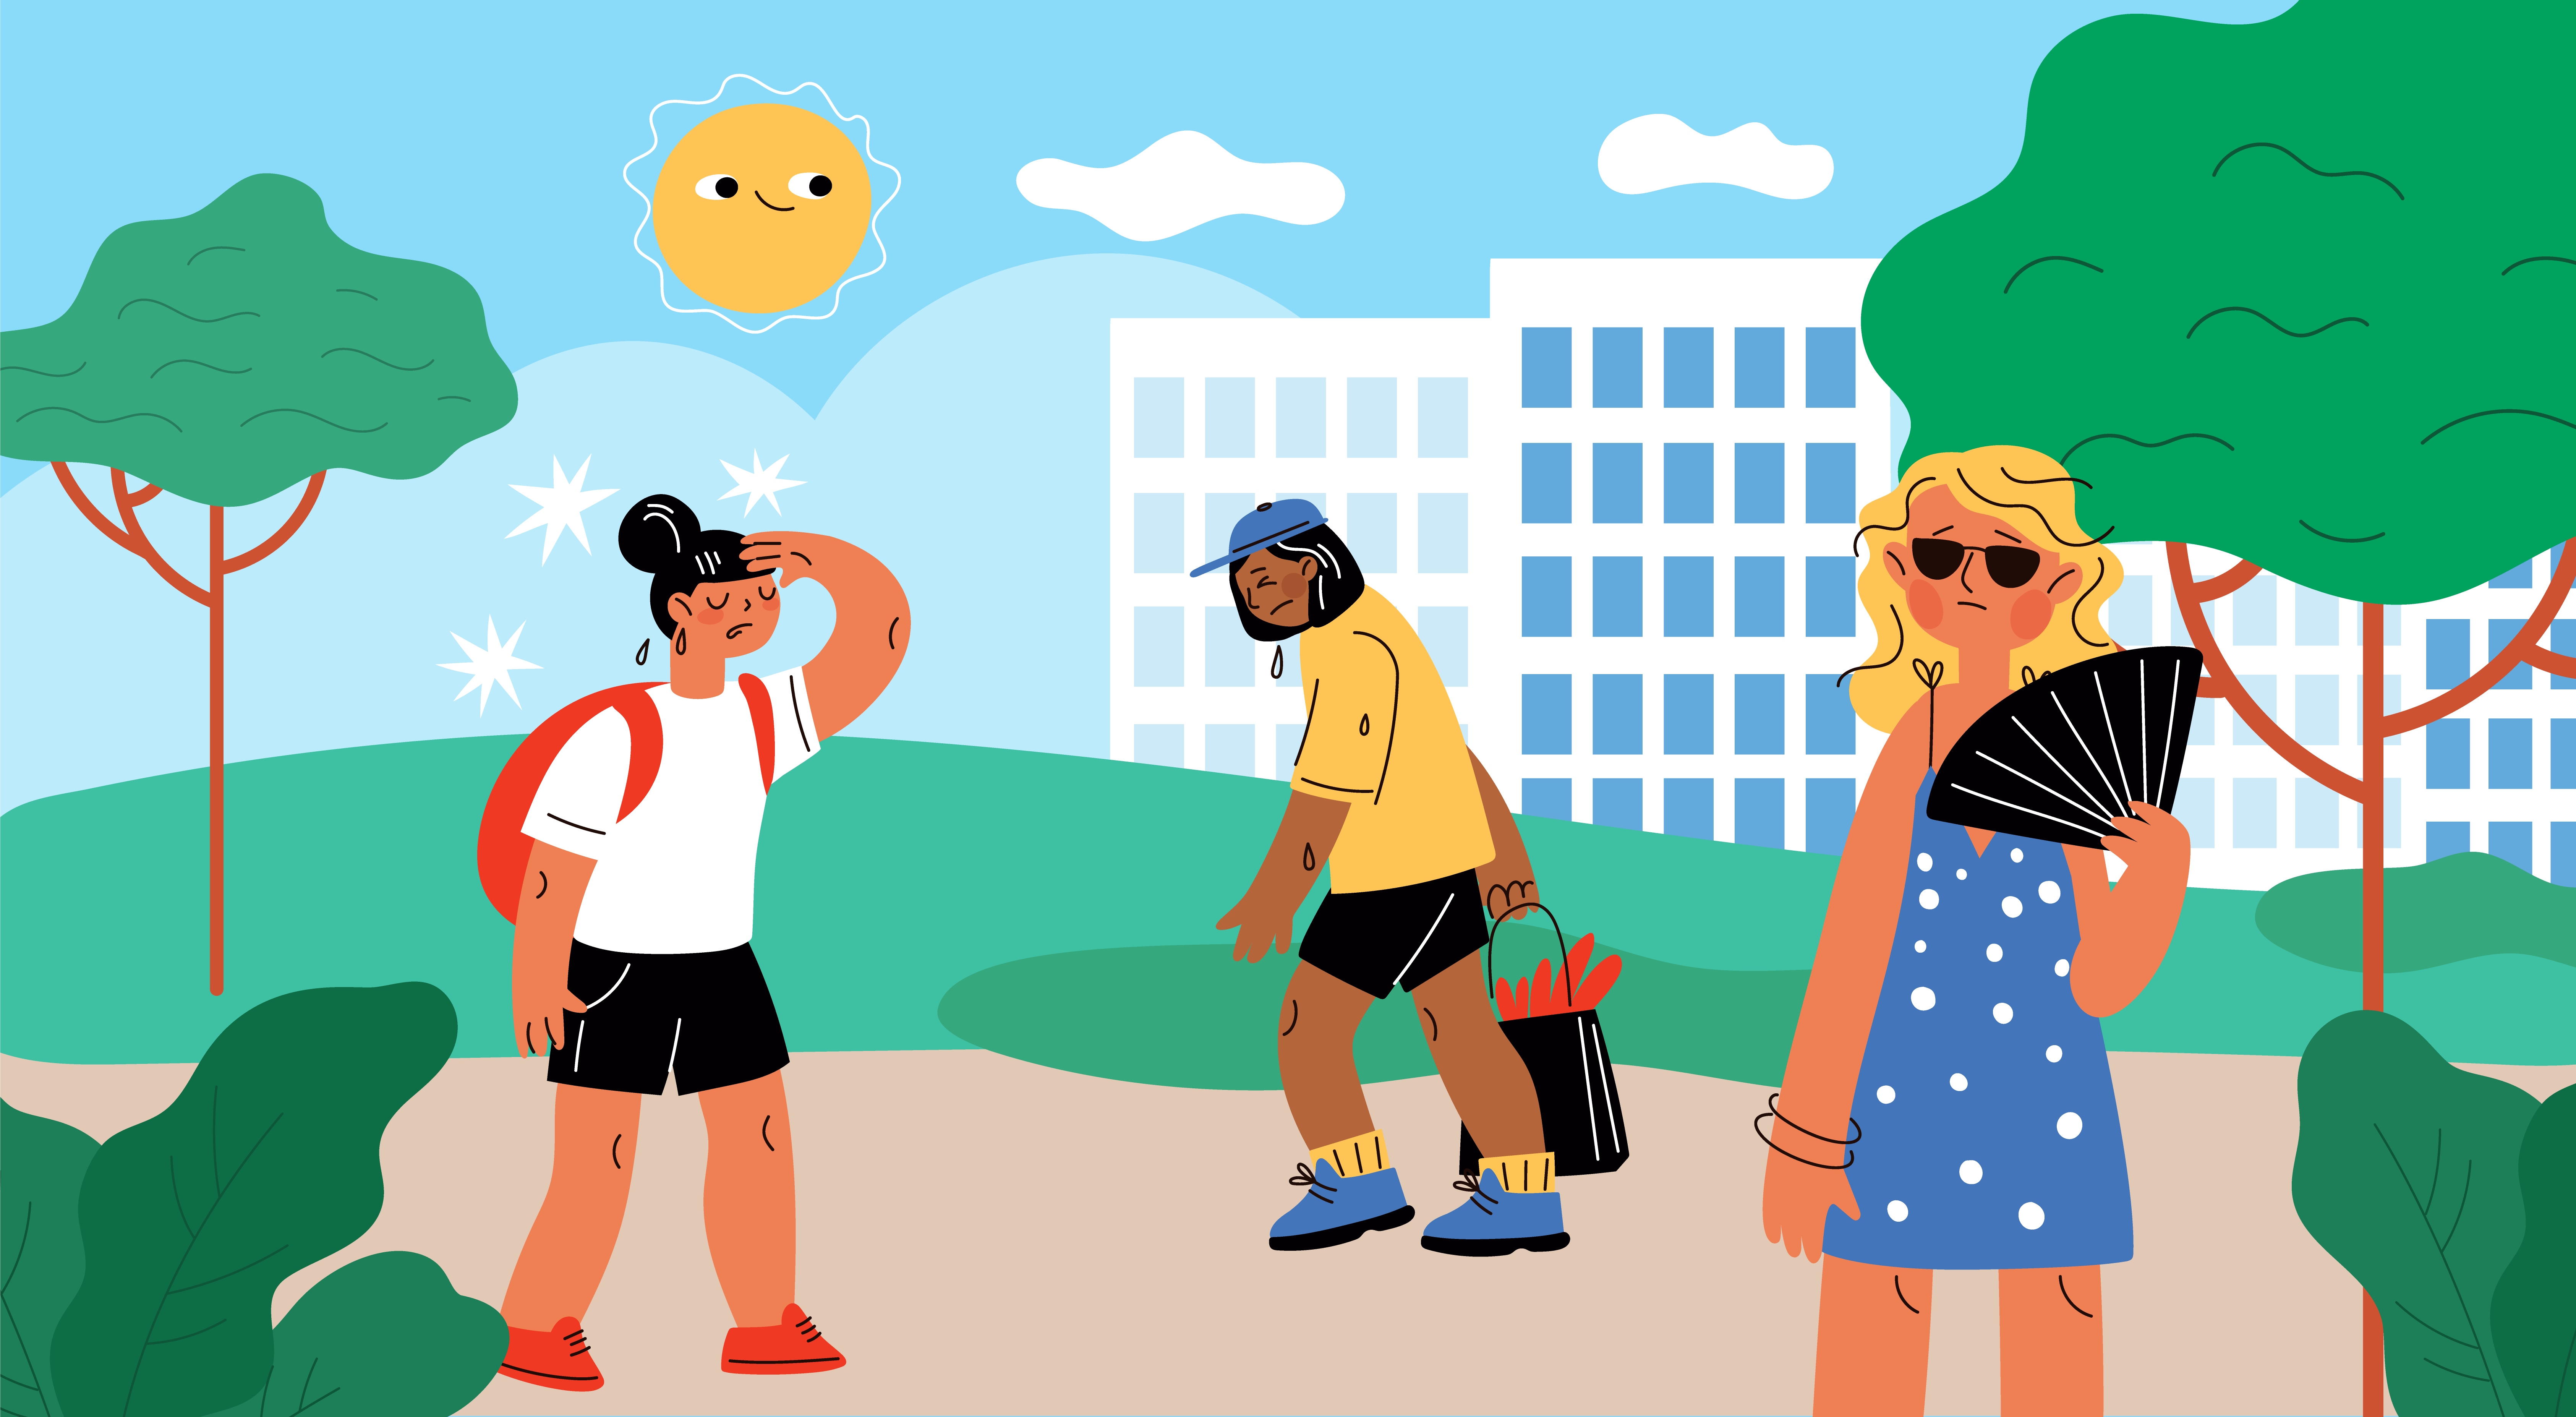 A cartoon drawing of three people walking through an urban park on a sunny day. A woman carrying a small backpack sweats with her hand on her head. A man looks disgruntled and sweats while holding a grocery bag. A woman in sunglasses fans herself under a tree.